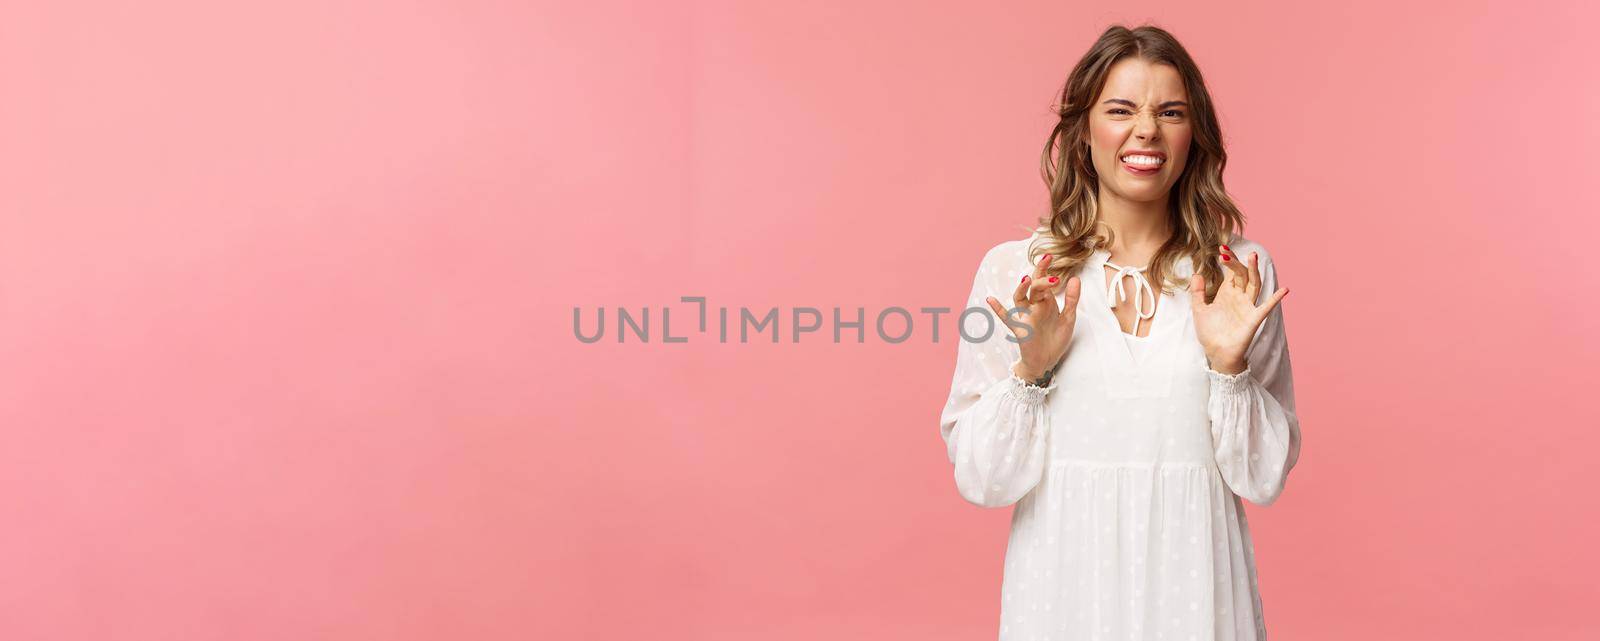 Portrait of girl cringe as telling friend disgusting awful story of her date with guy, show tongue grimacing and press hands to body as feeling discomfort and aversion, stand pink background.